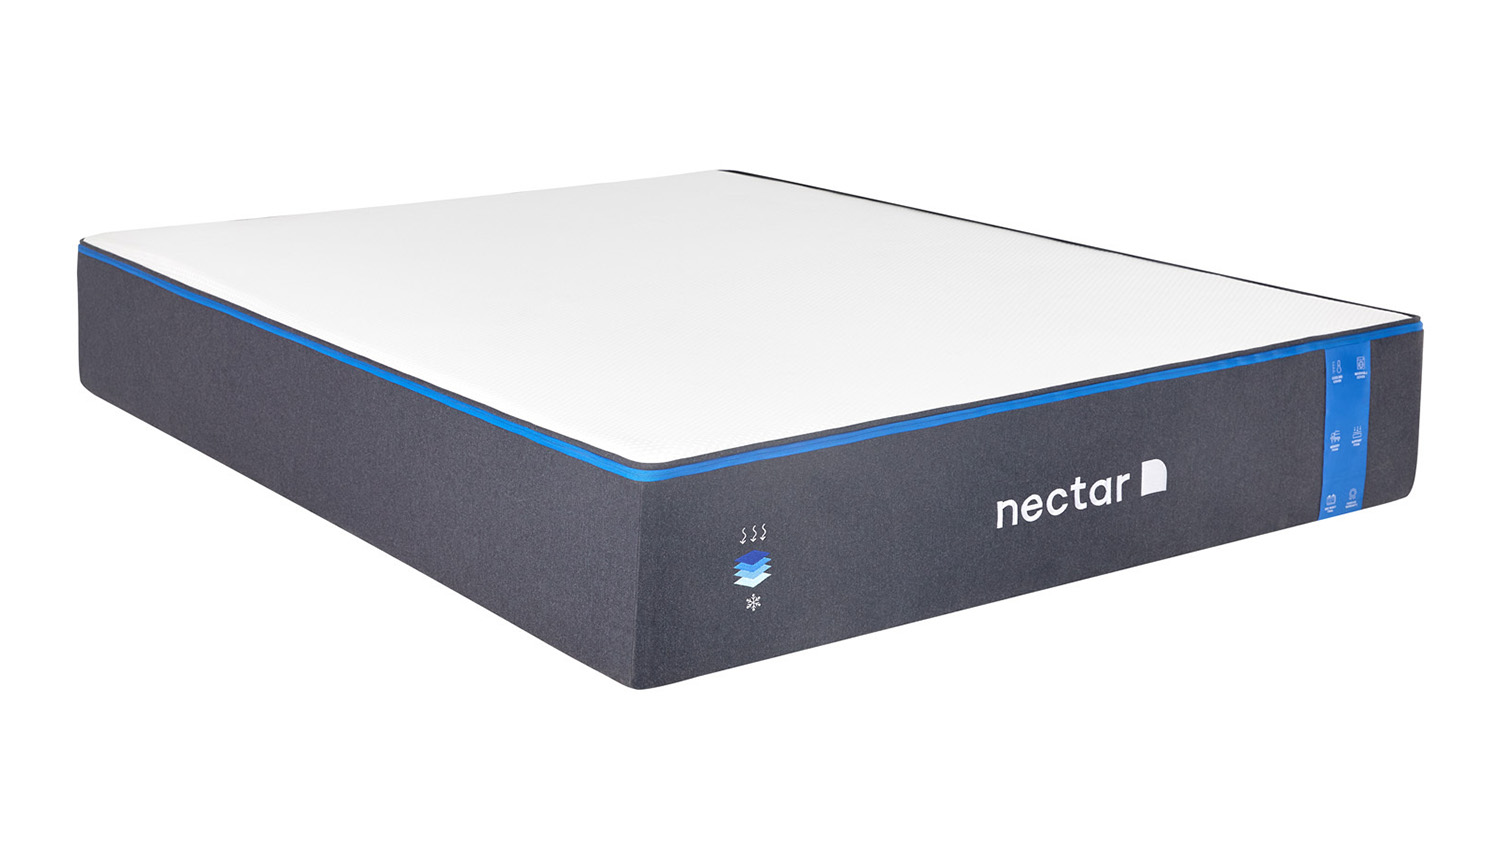 The Nectar Memory Foam shown at an angle so you can see the white cover and Nectar logo on the deep blue base